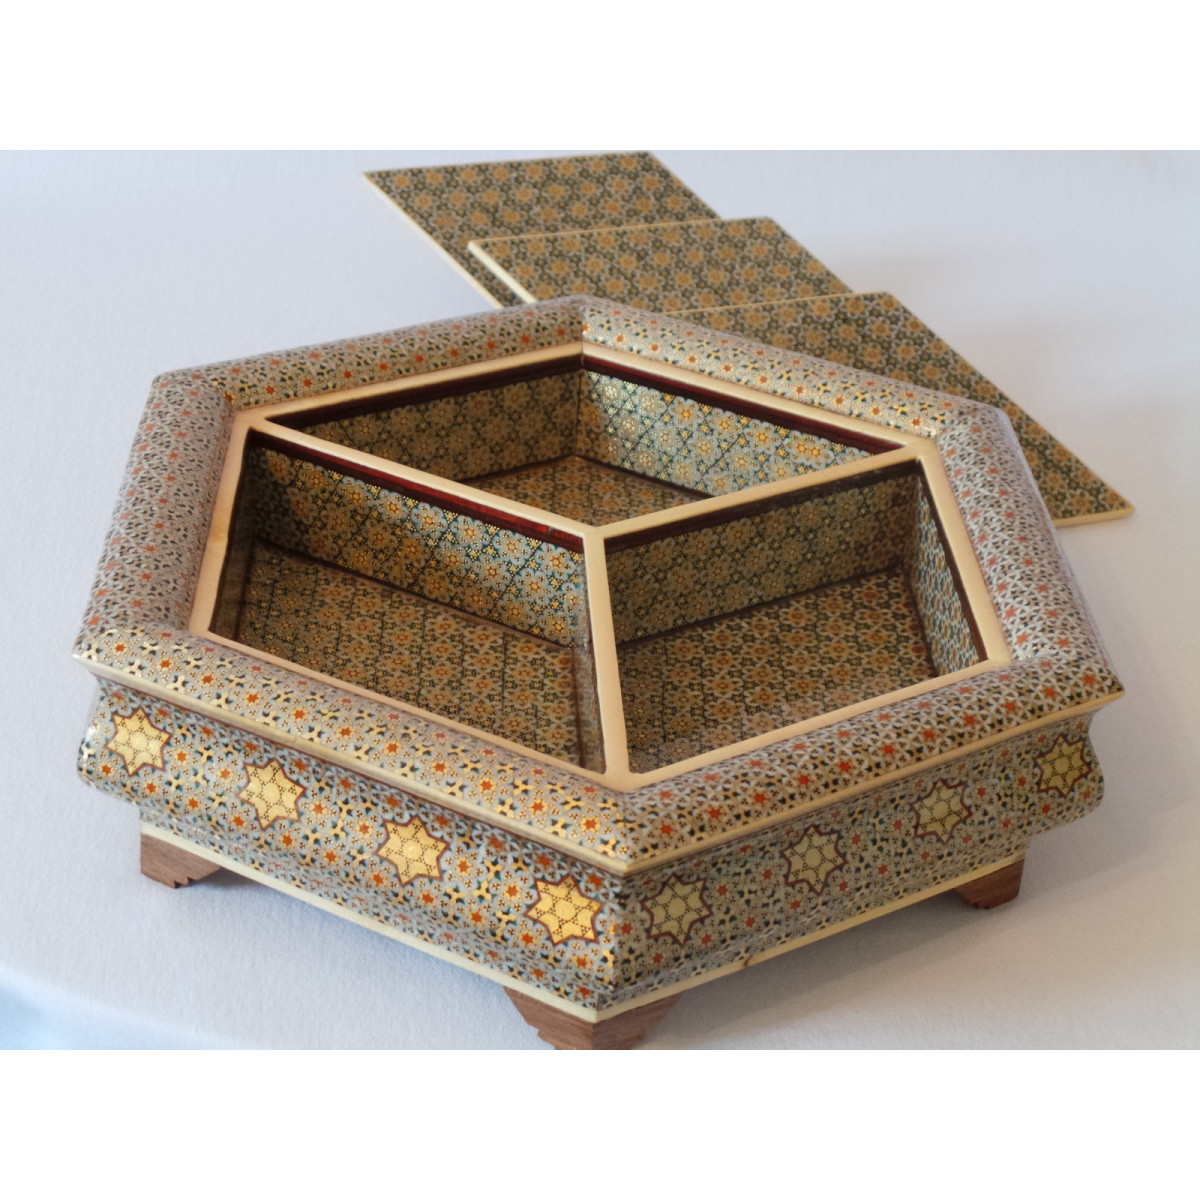 In & Out Khatam on Wood Candy/Nuts Hexagon Dish - HKH2044-Persian Handicrafts